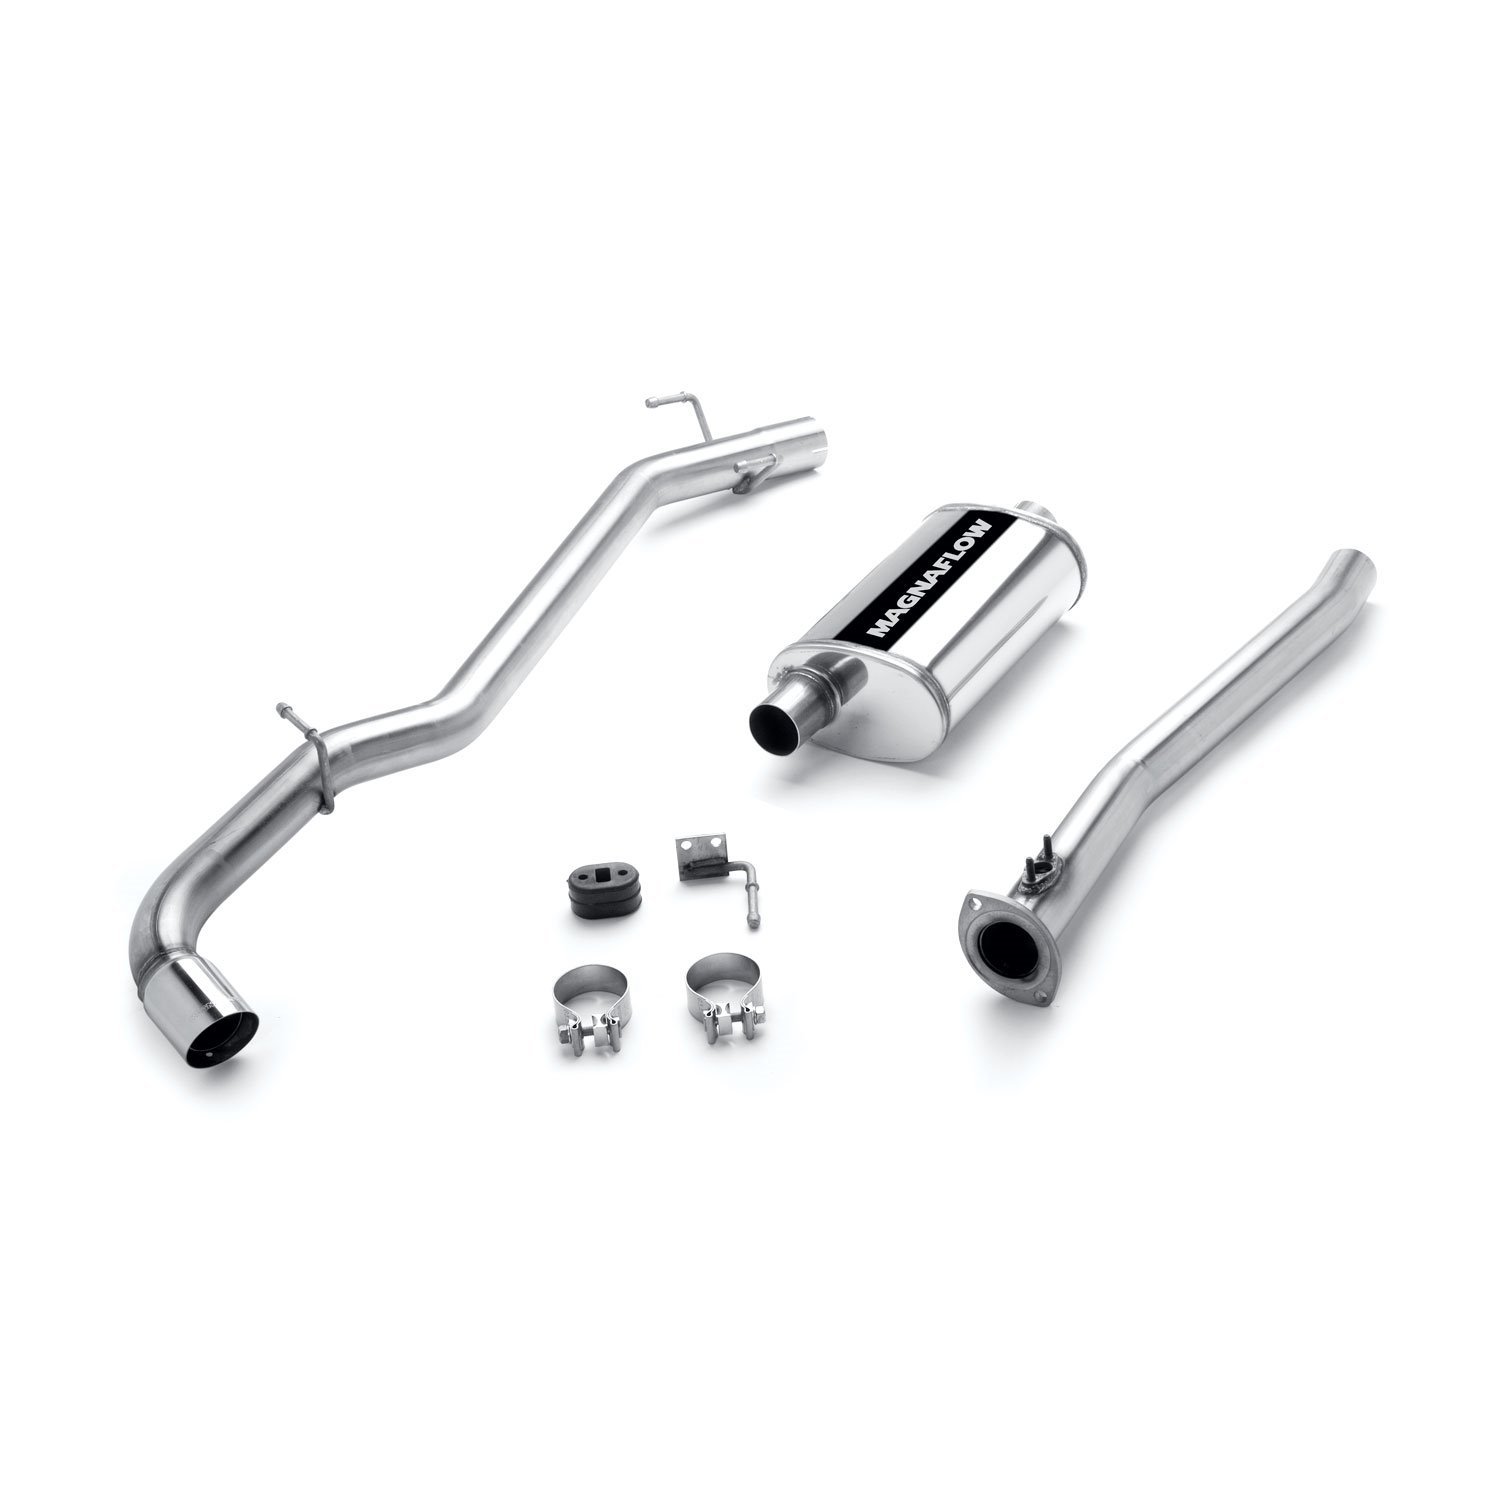 MF Series Cat-Back Exhaust System 2000-04 Tacoma PreRunner 2.7L/3.4L (Ext. Cab)